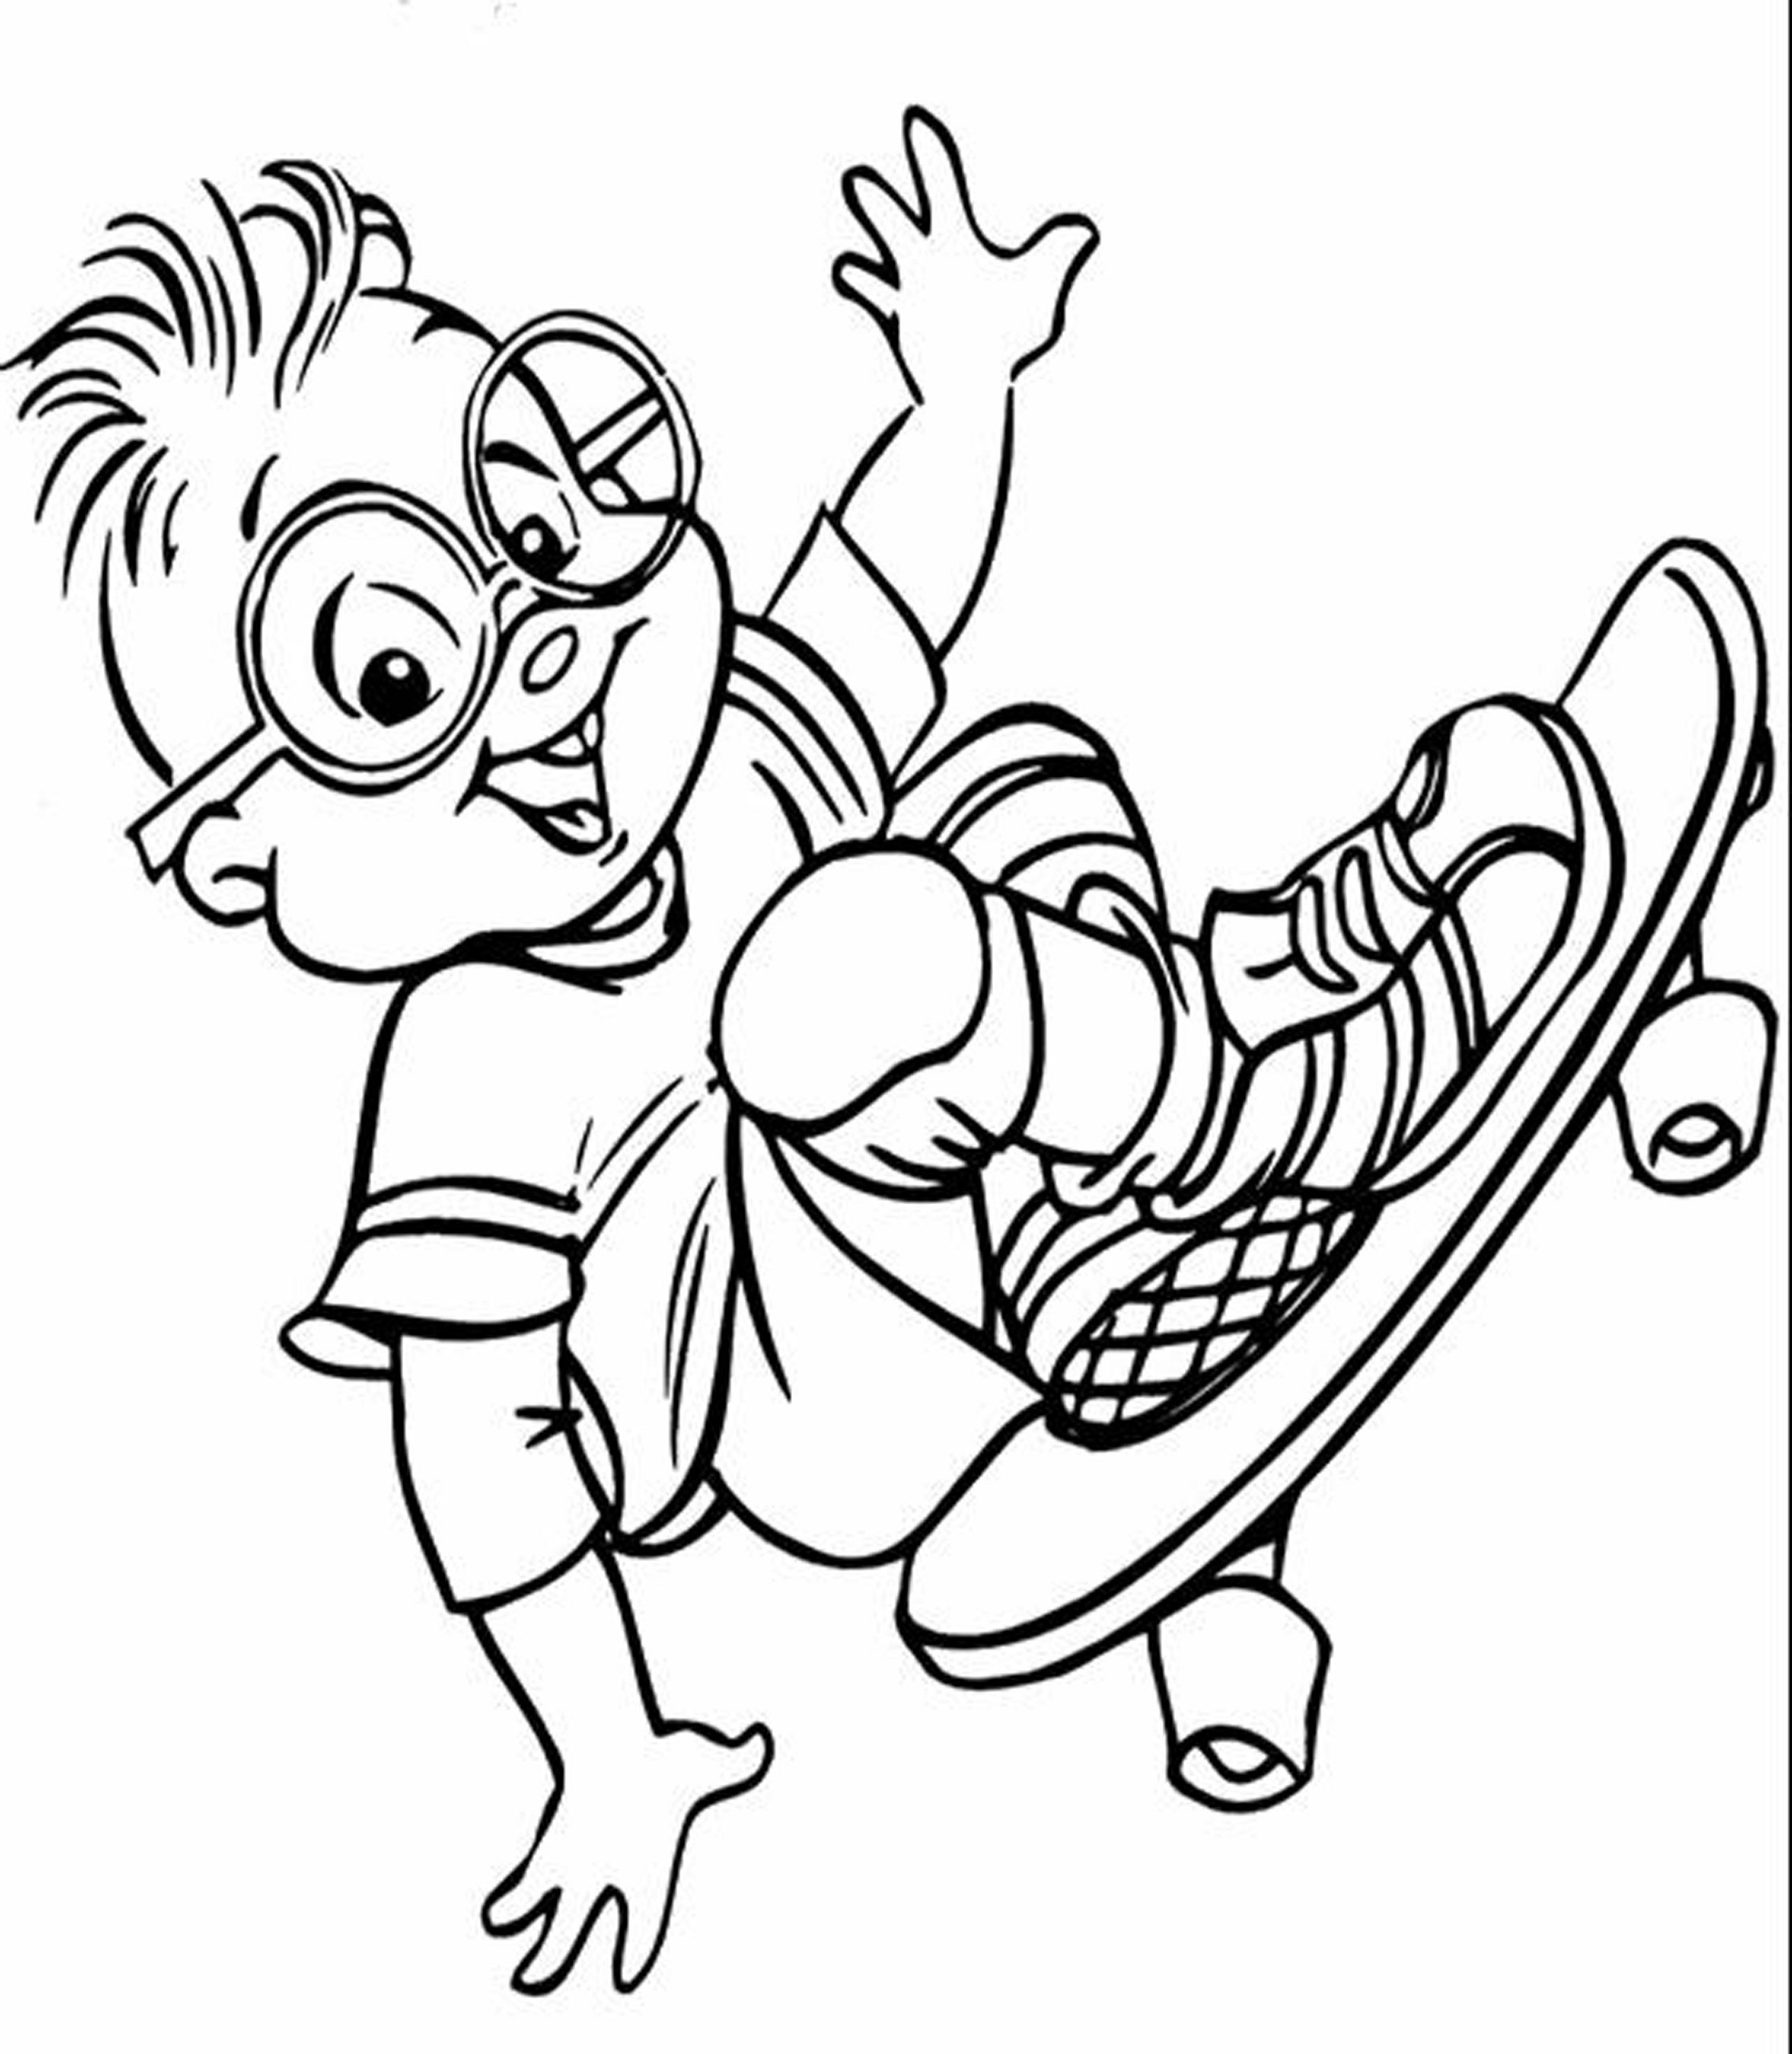 Coloring pages for kids boys playing scutter